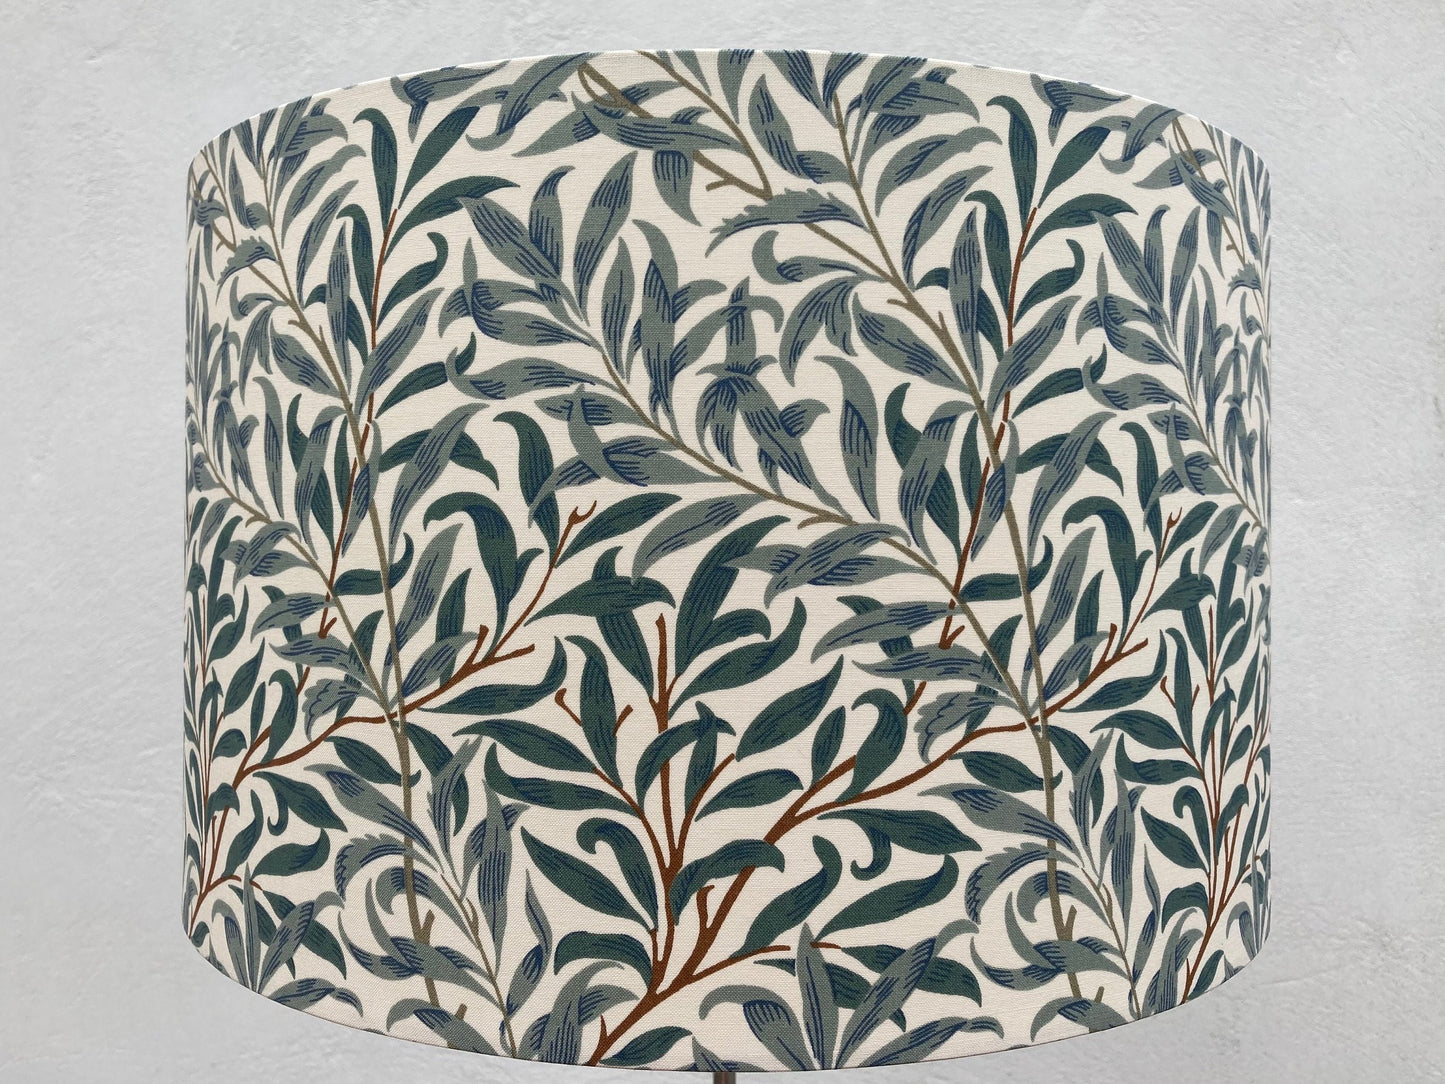 William Morris Green Willow Bough Fabric Lampshade for Table or Ceiling Lamps